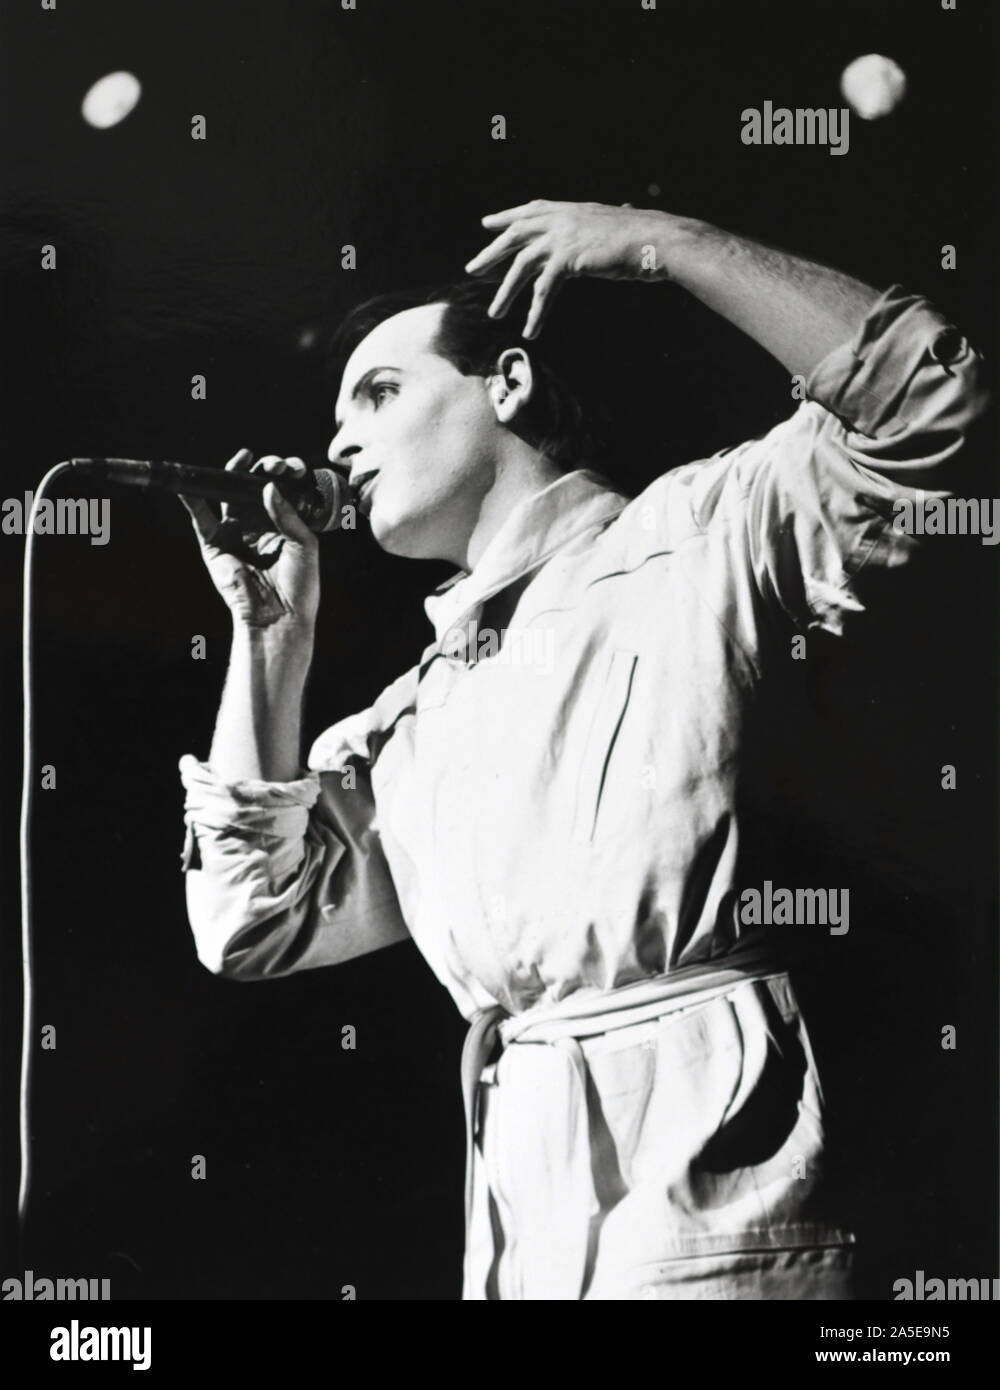 Gary Numan on stage during the 1984 Berserker Tour. Stock Photo